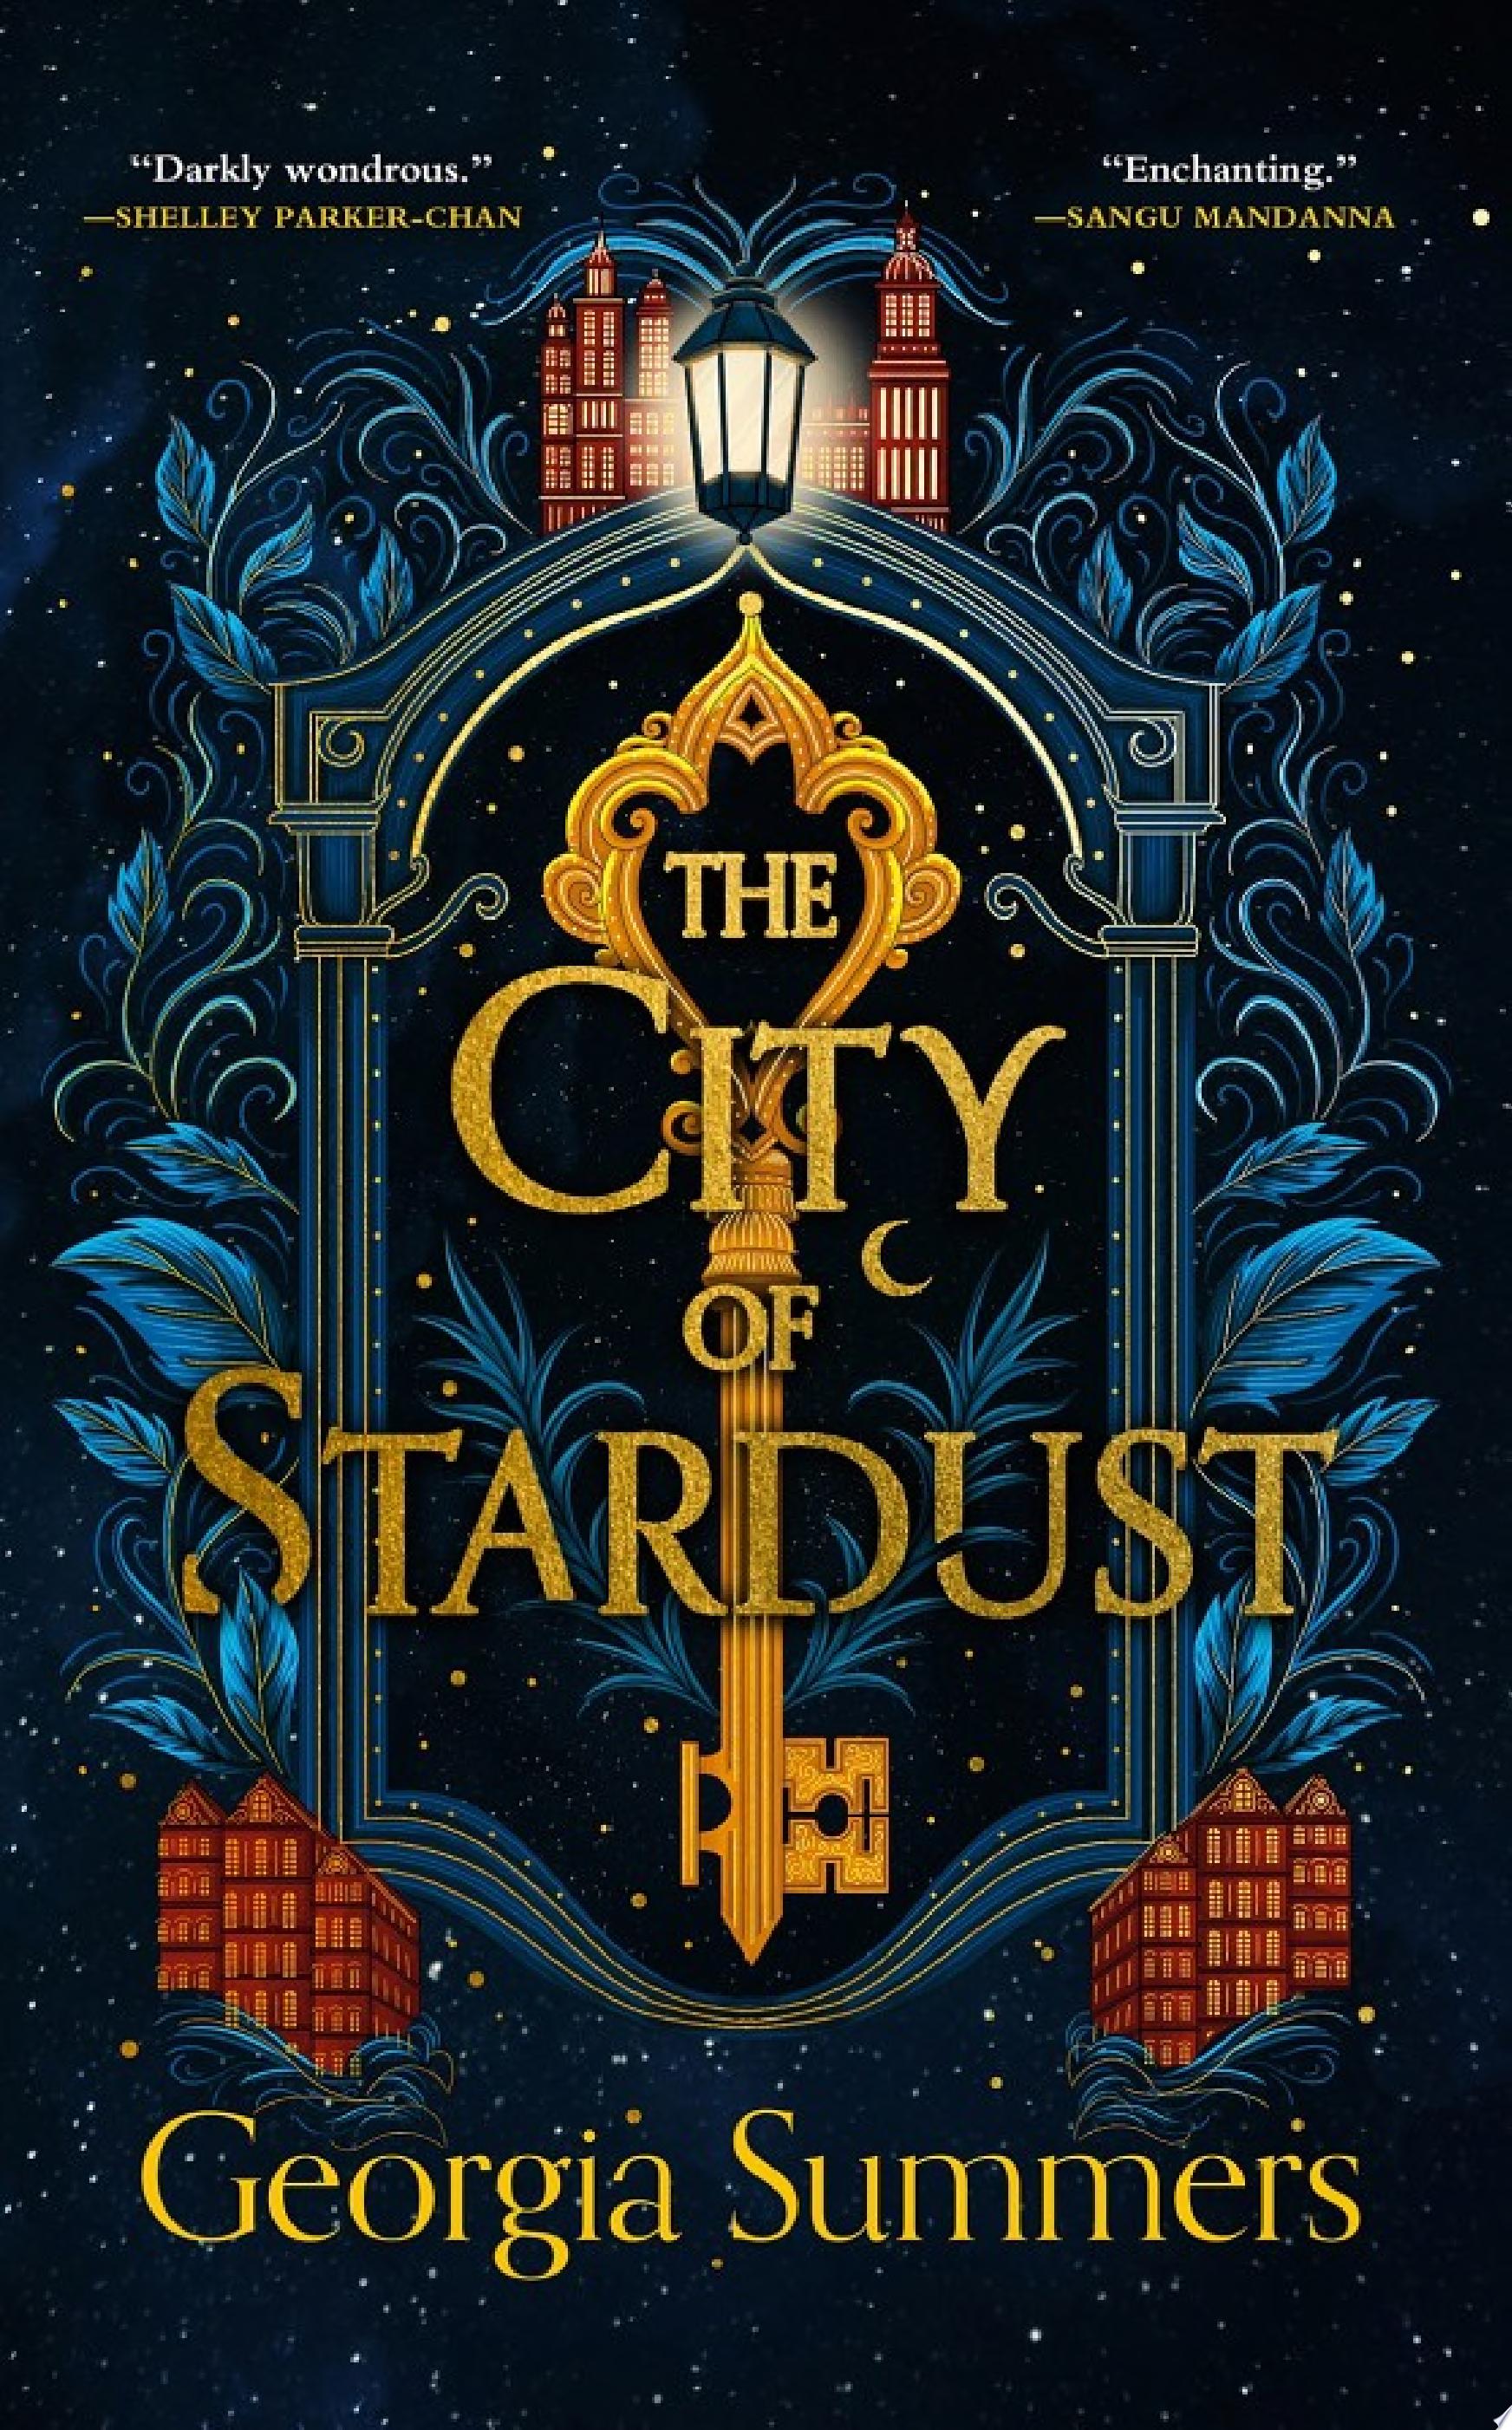 Image for "The City of Stardust"